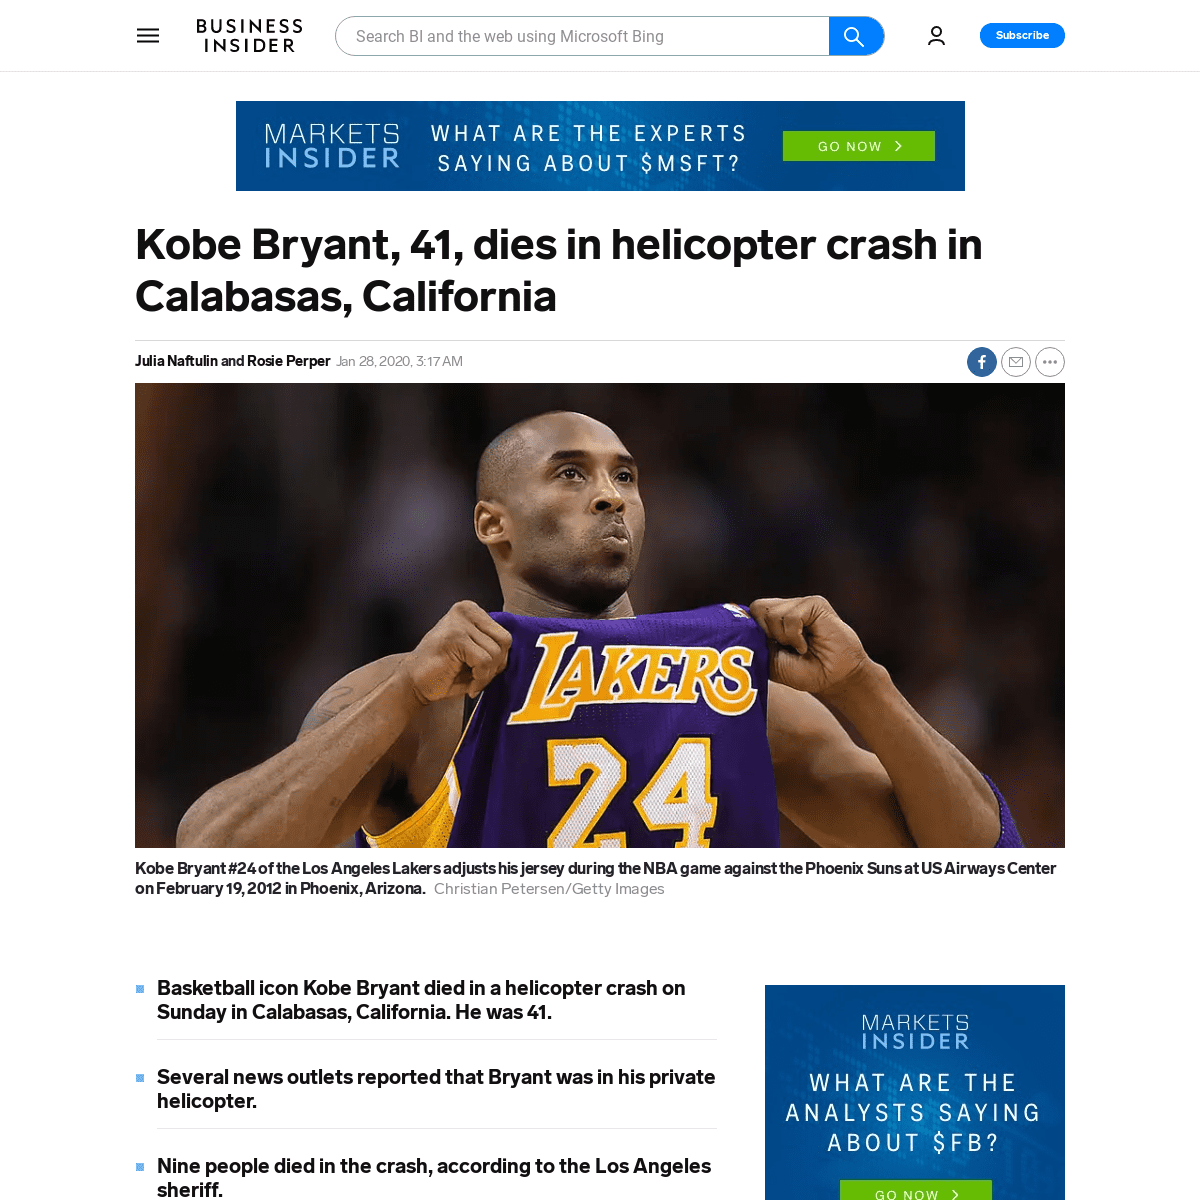 A complete backup of www.businessinsider.com/kobe-bryant-dead-helicopter-crash-in-calabasas-california-2020-1